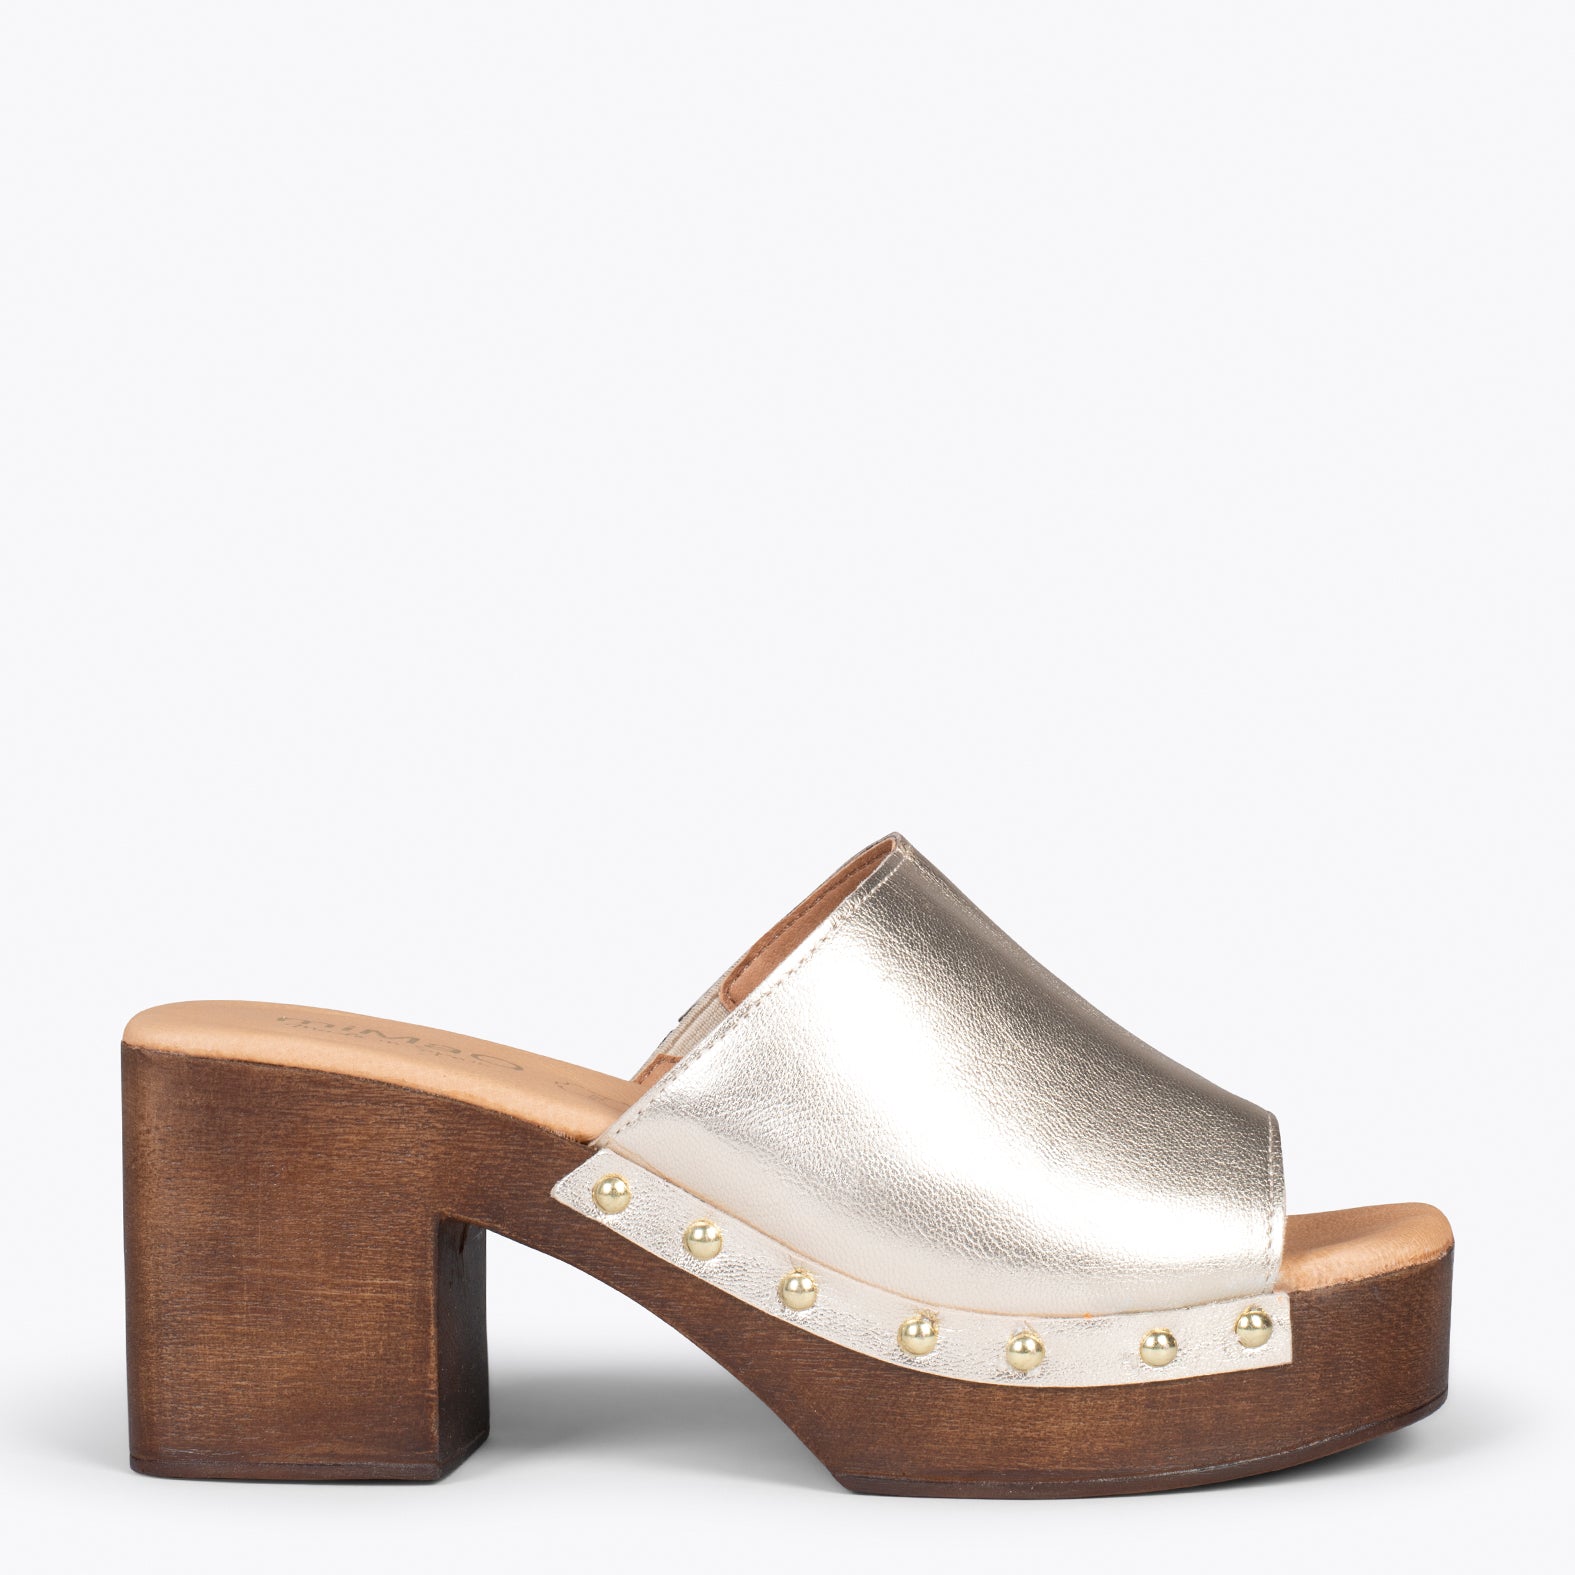 HOLIDAY – GOLDEN mules with heel and platform